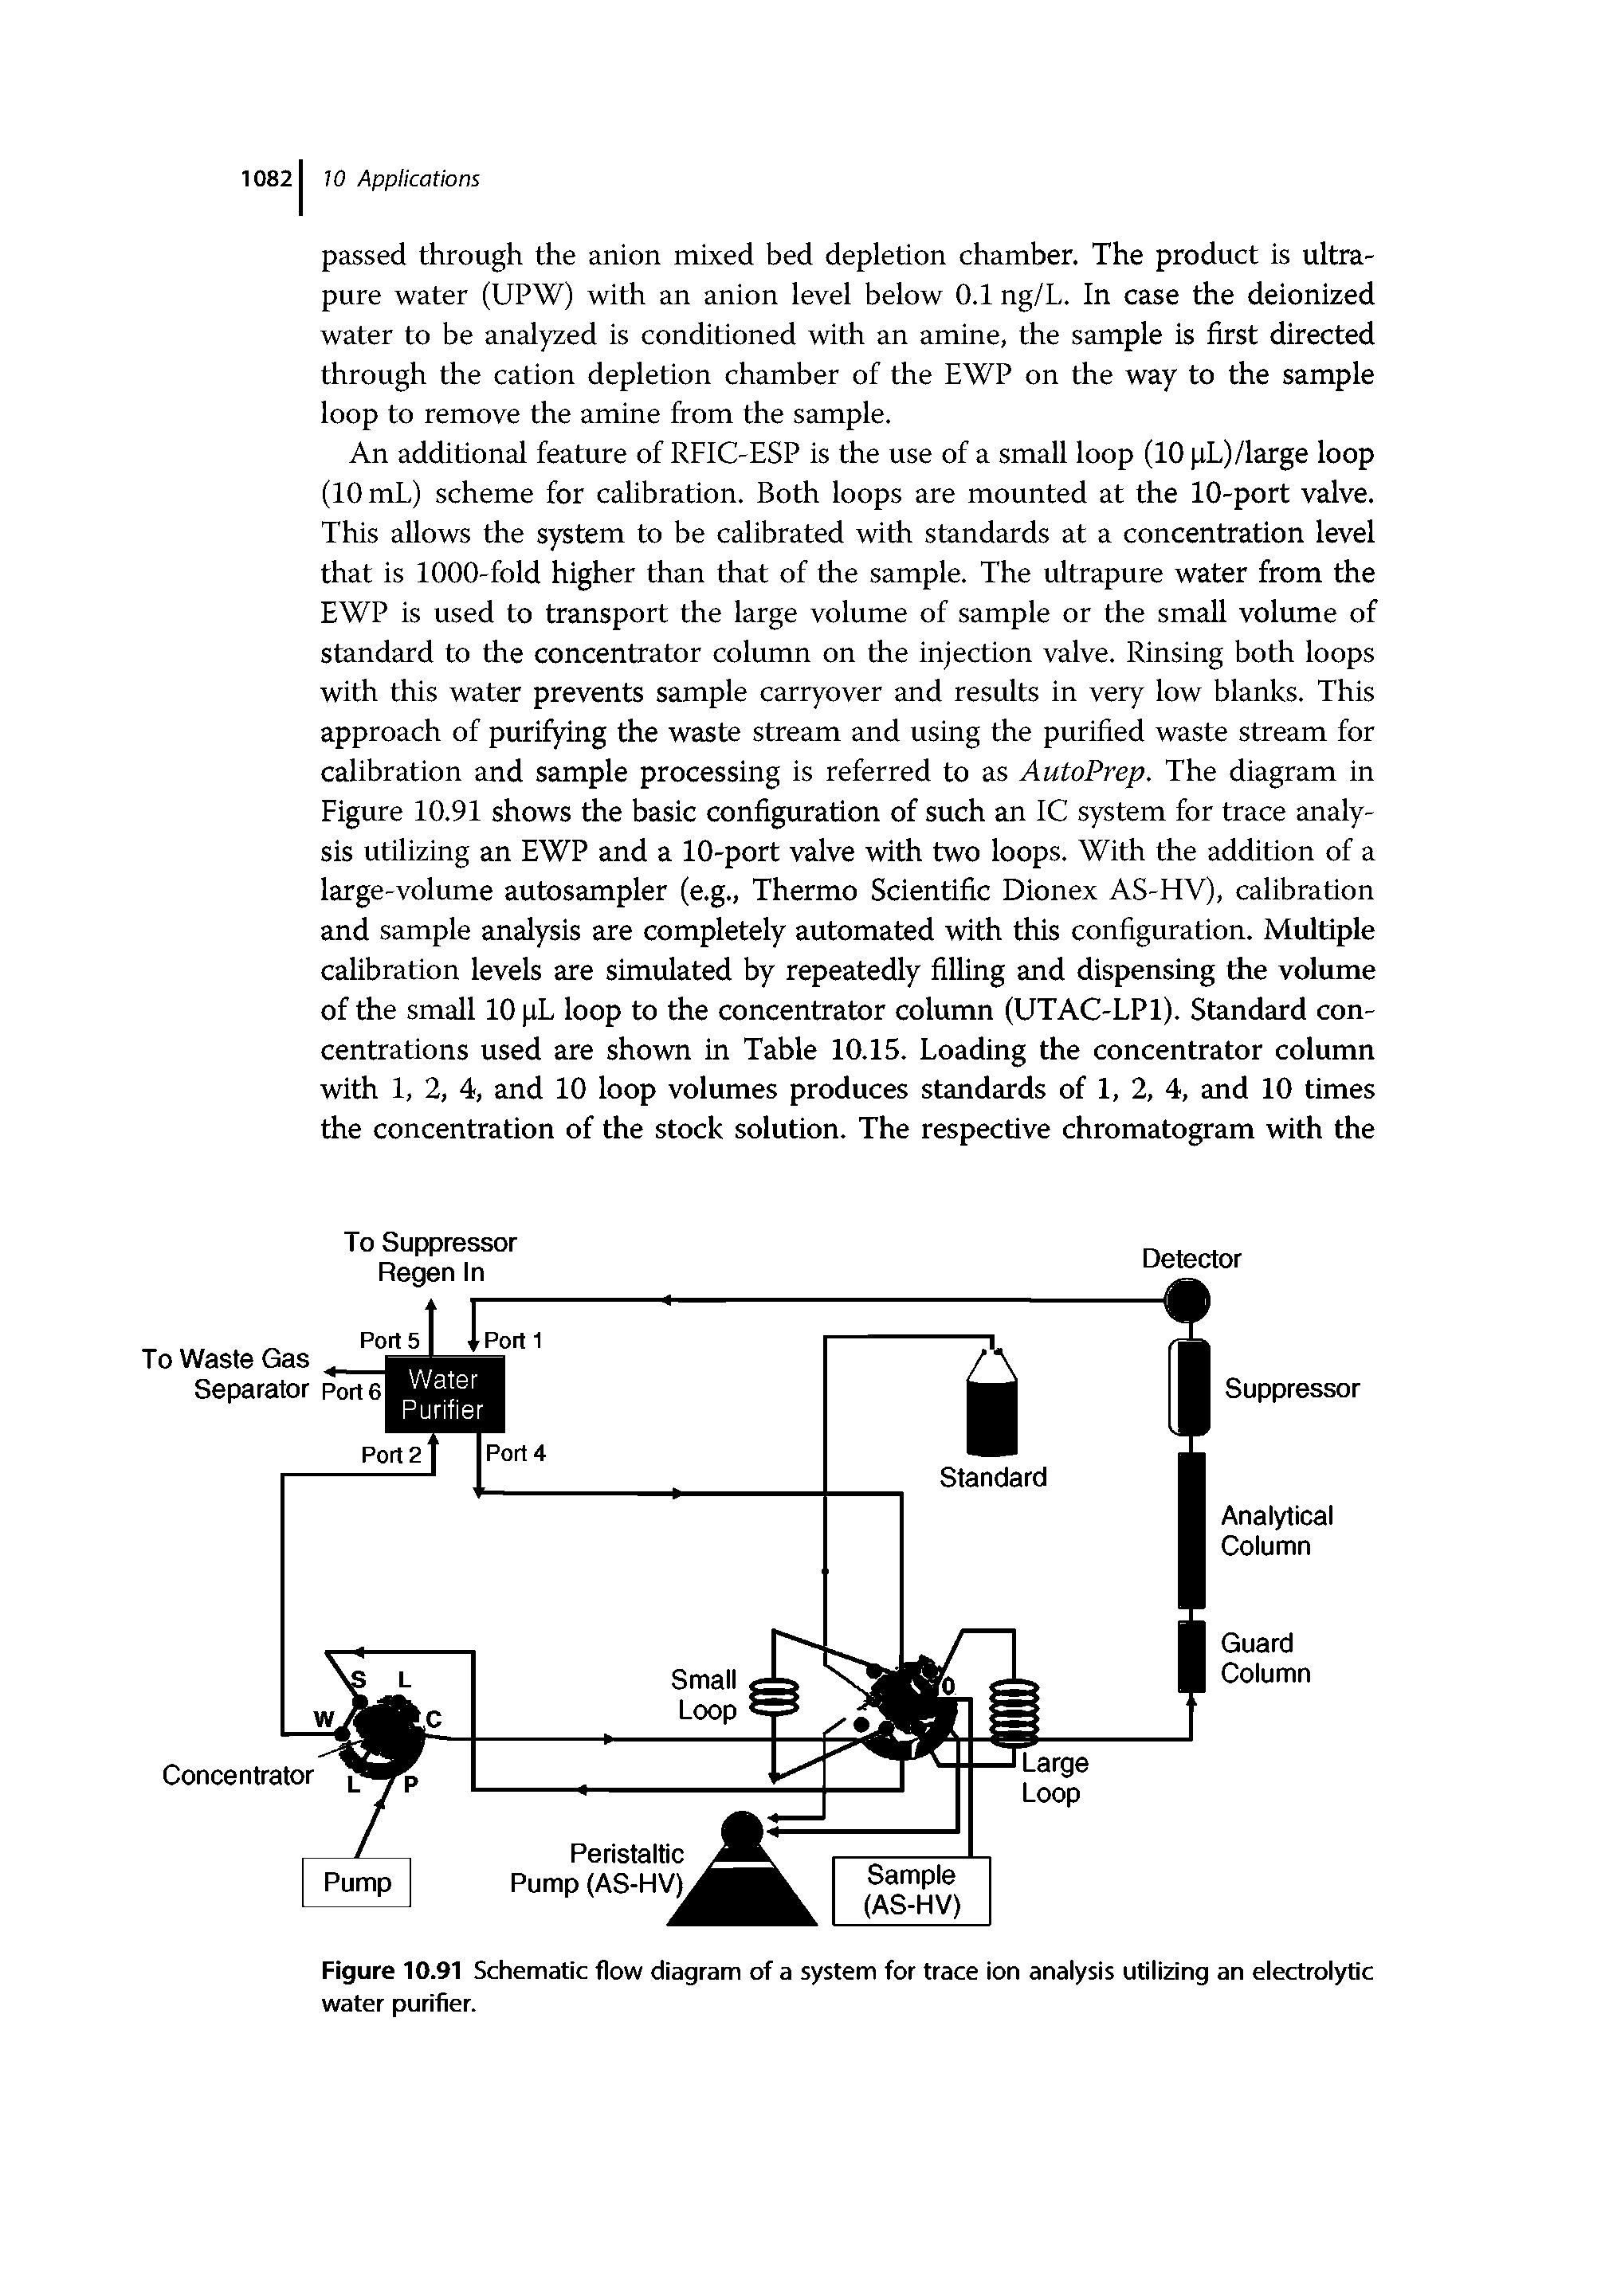 Figure 10.91 Schematic flow diagram of a system for trace ion analysis utilizing an electrolytic water purifier.